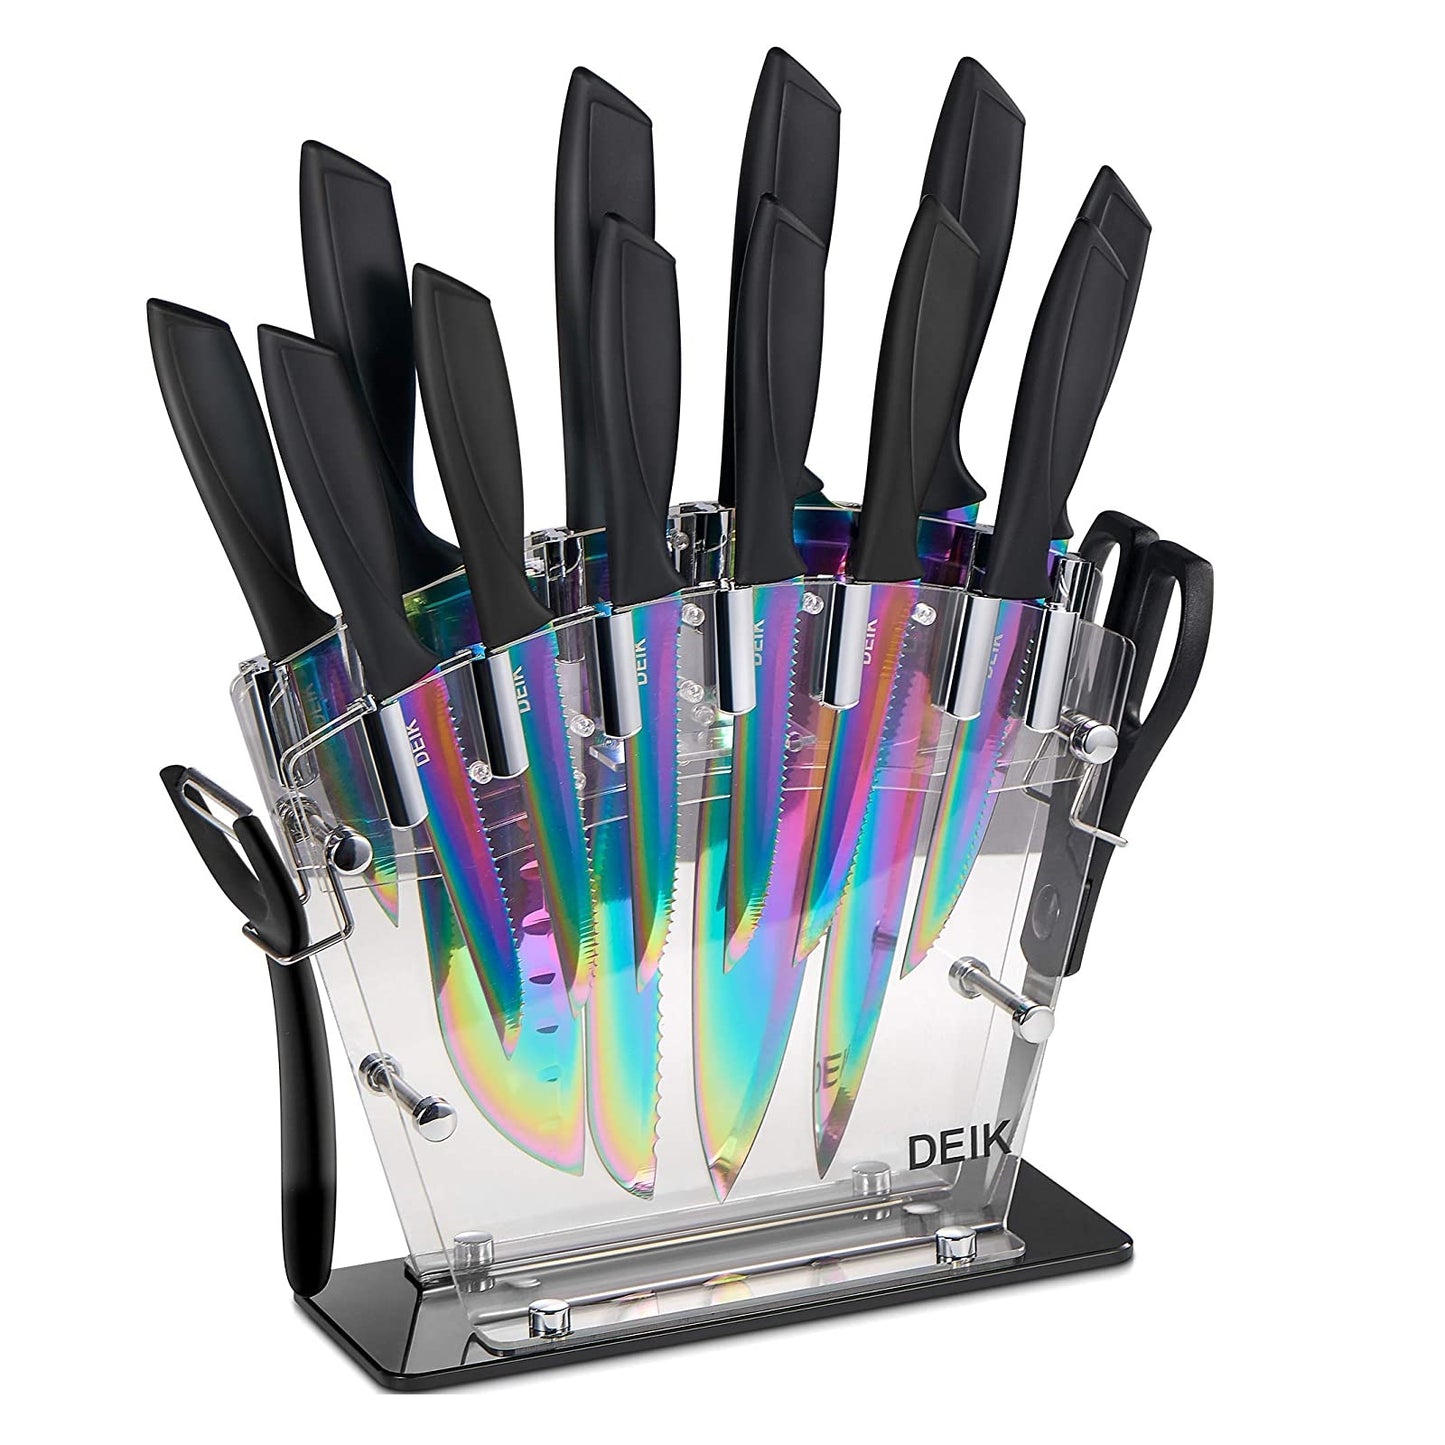 DEIK 16 PCS Titanium Knife Set, High Carbon Stainless Steel Kitchen Knife Set, Anti-rusting, Super Sharp Cutlery Knife Set with Acrylic Stand and Serrated Steak Knives